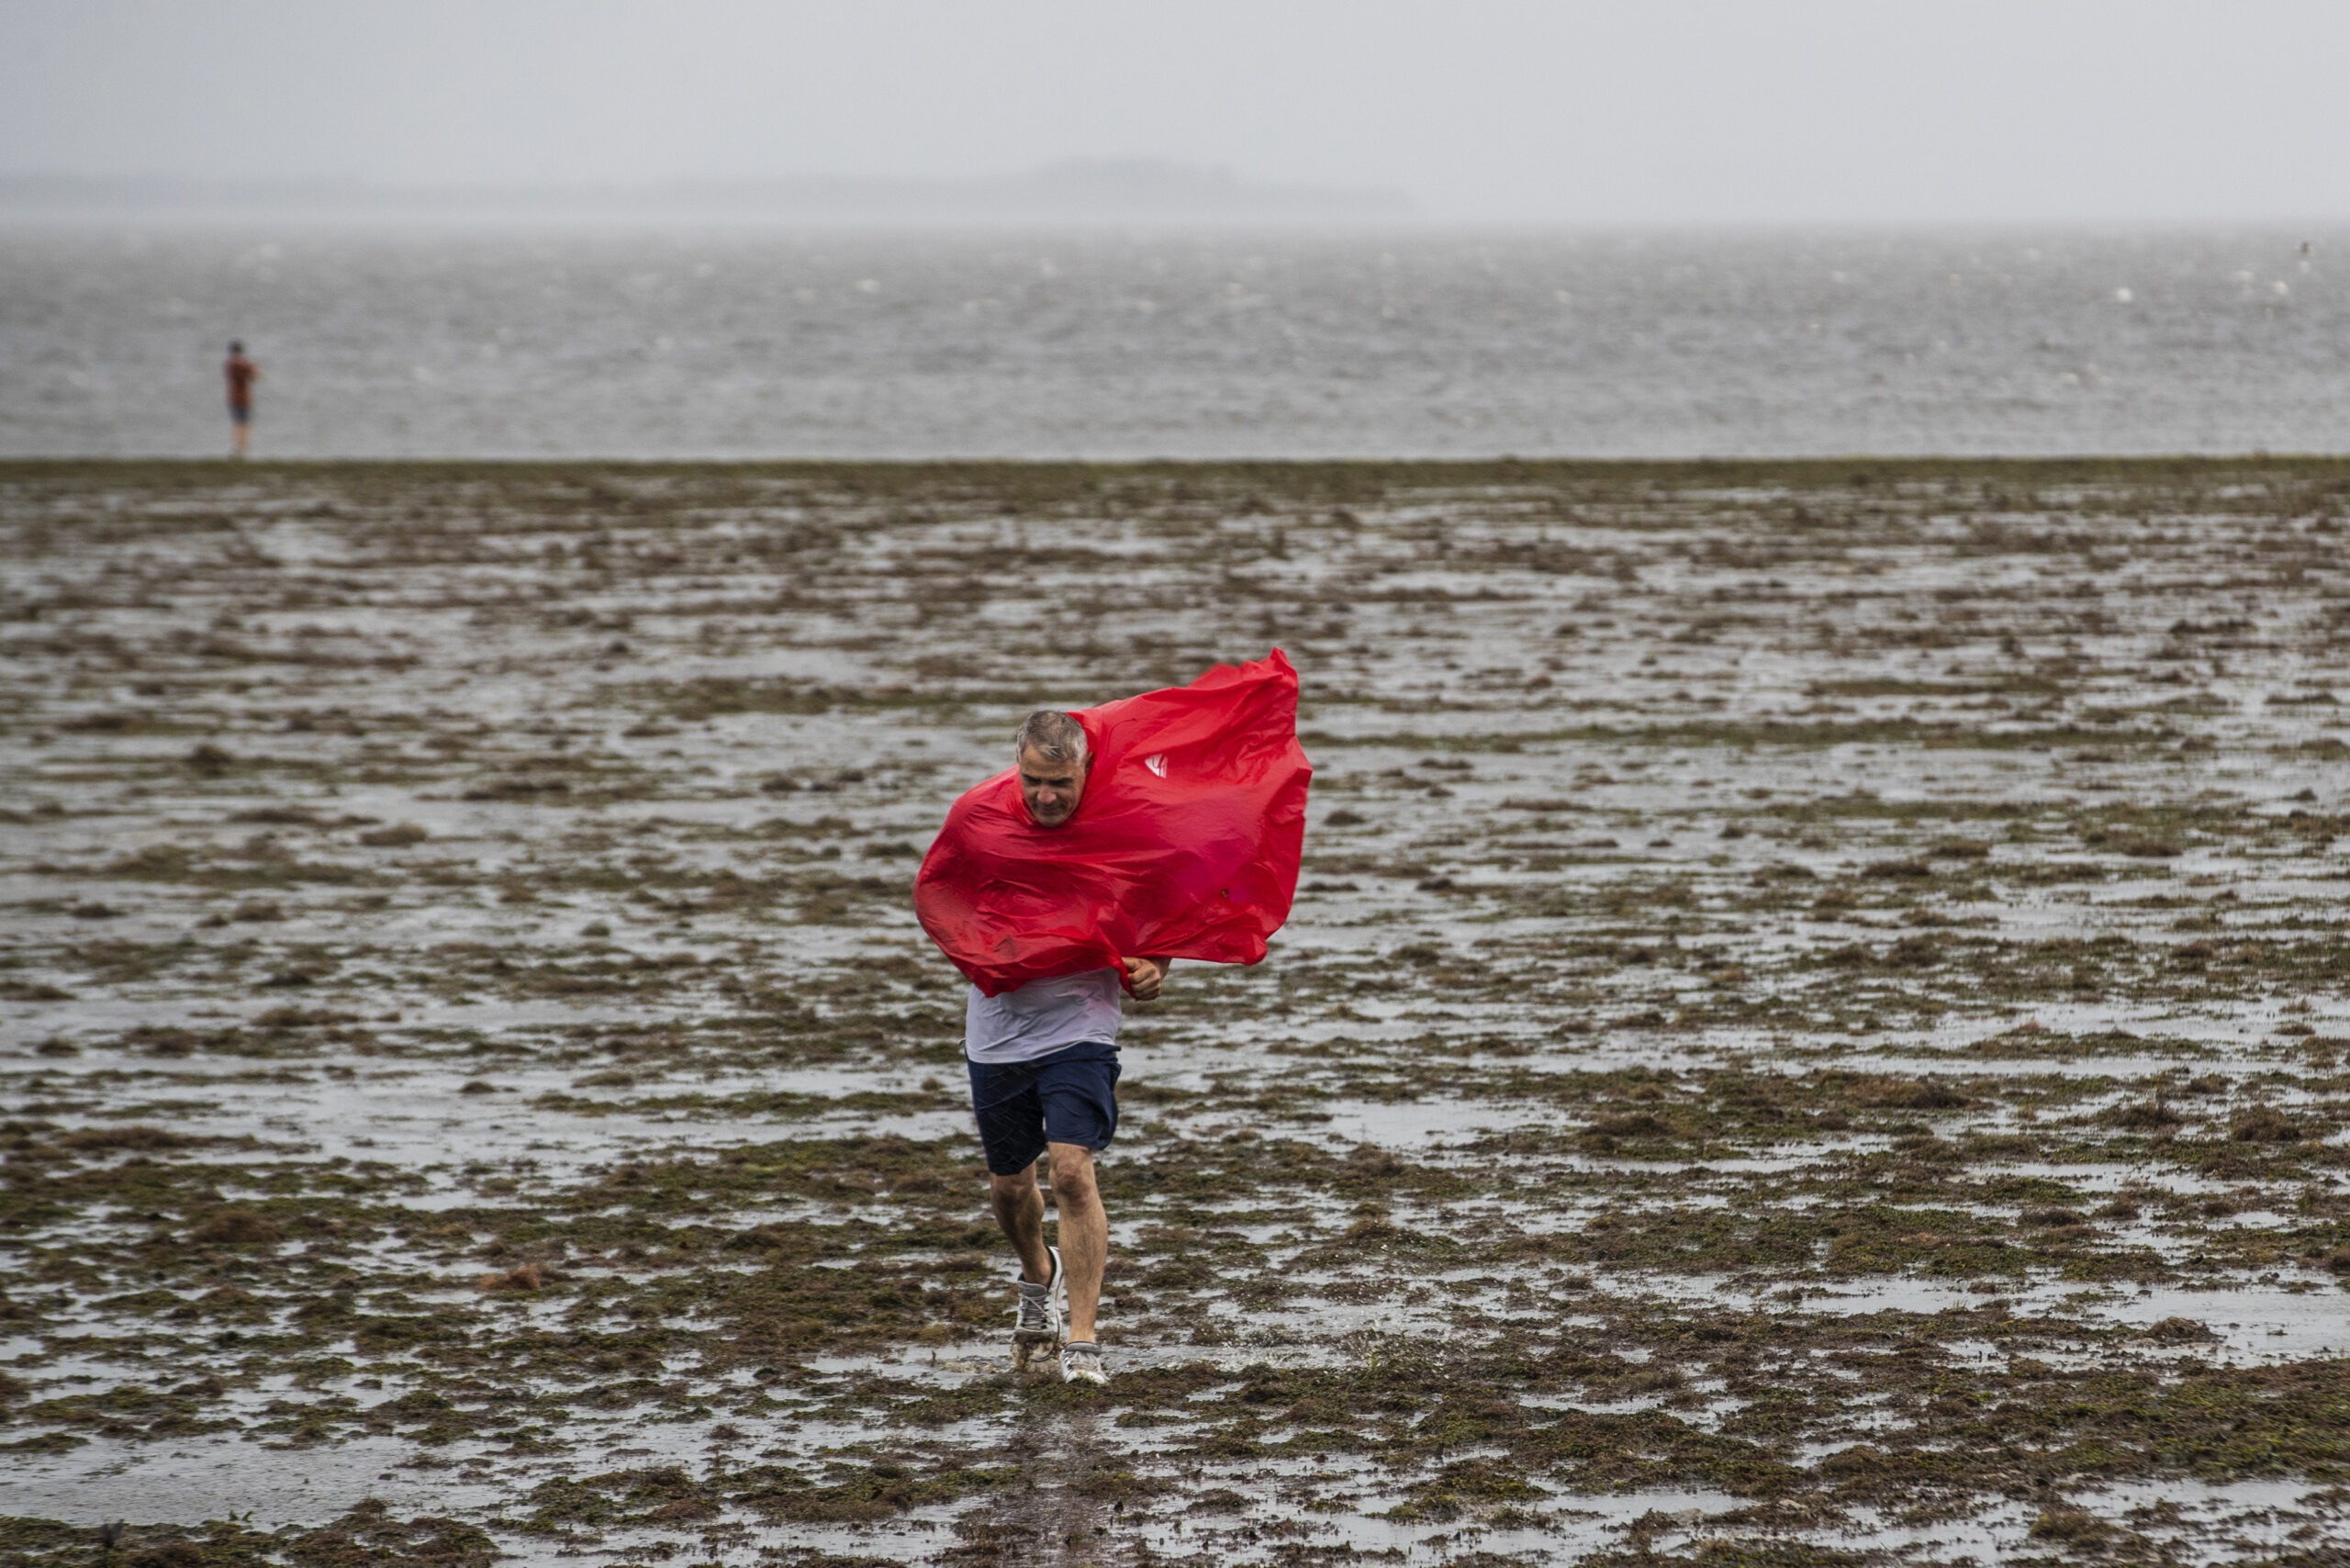 Curious sightseers walk in the receding waters of Tampa Bay due to the low tide and tremendous winds from Hurricane Ian in Tampa, Fla., Wednesday, Sept. 28, 2022. (Willie J. Allen Jr./Orlando Sentinel via AP)